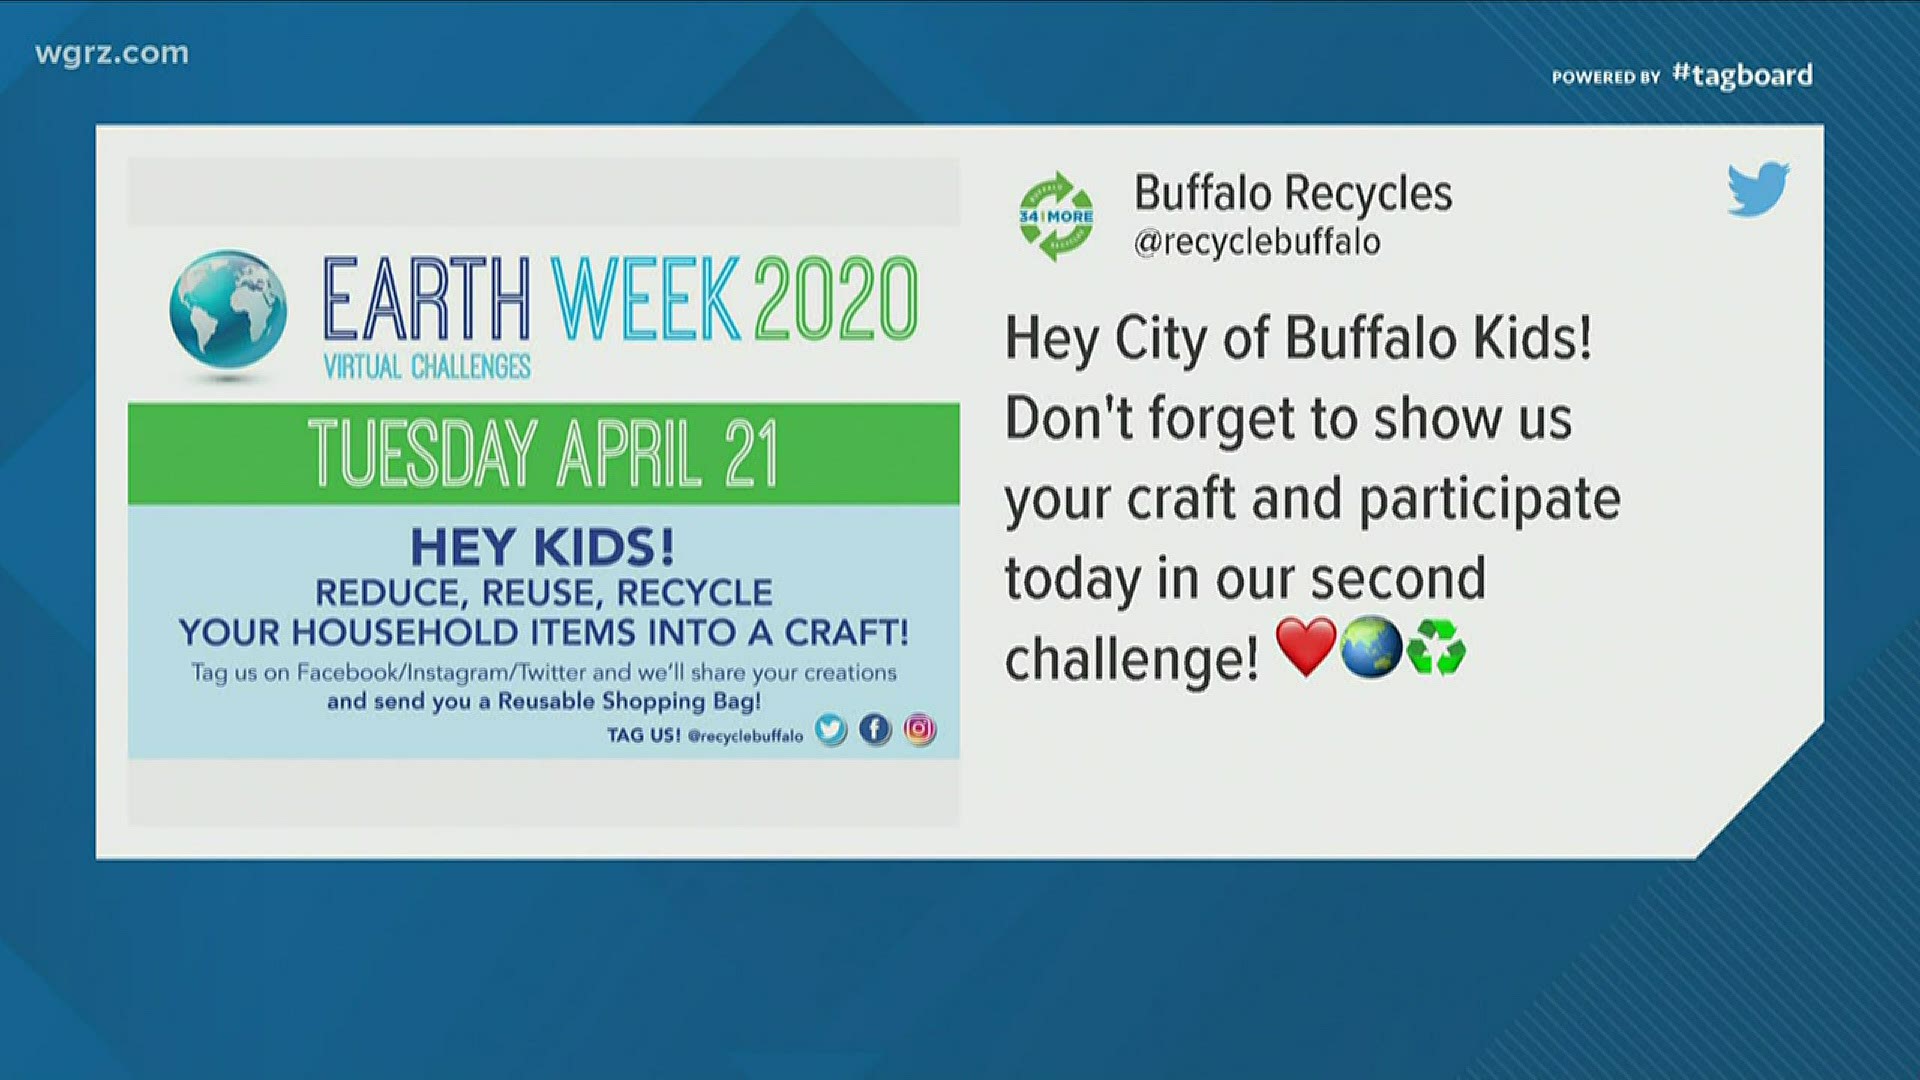 The City of Buffalo rolls out a week of virtual activities and challenges to celebrate Earth Week at home.